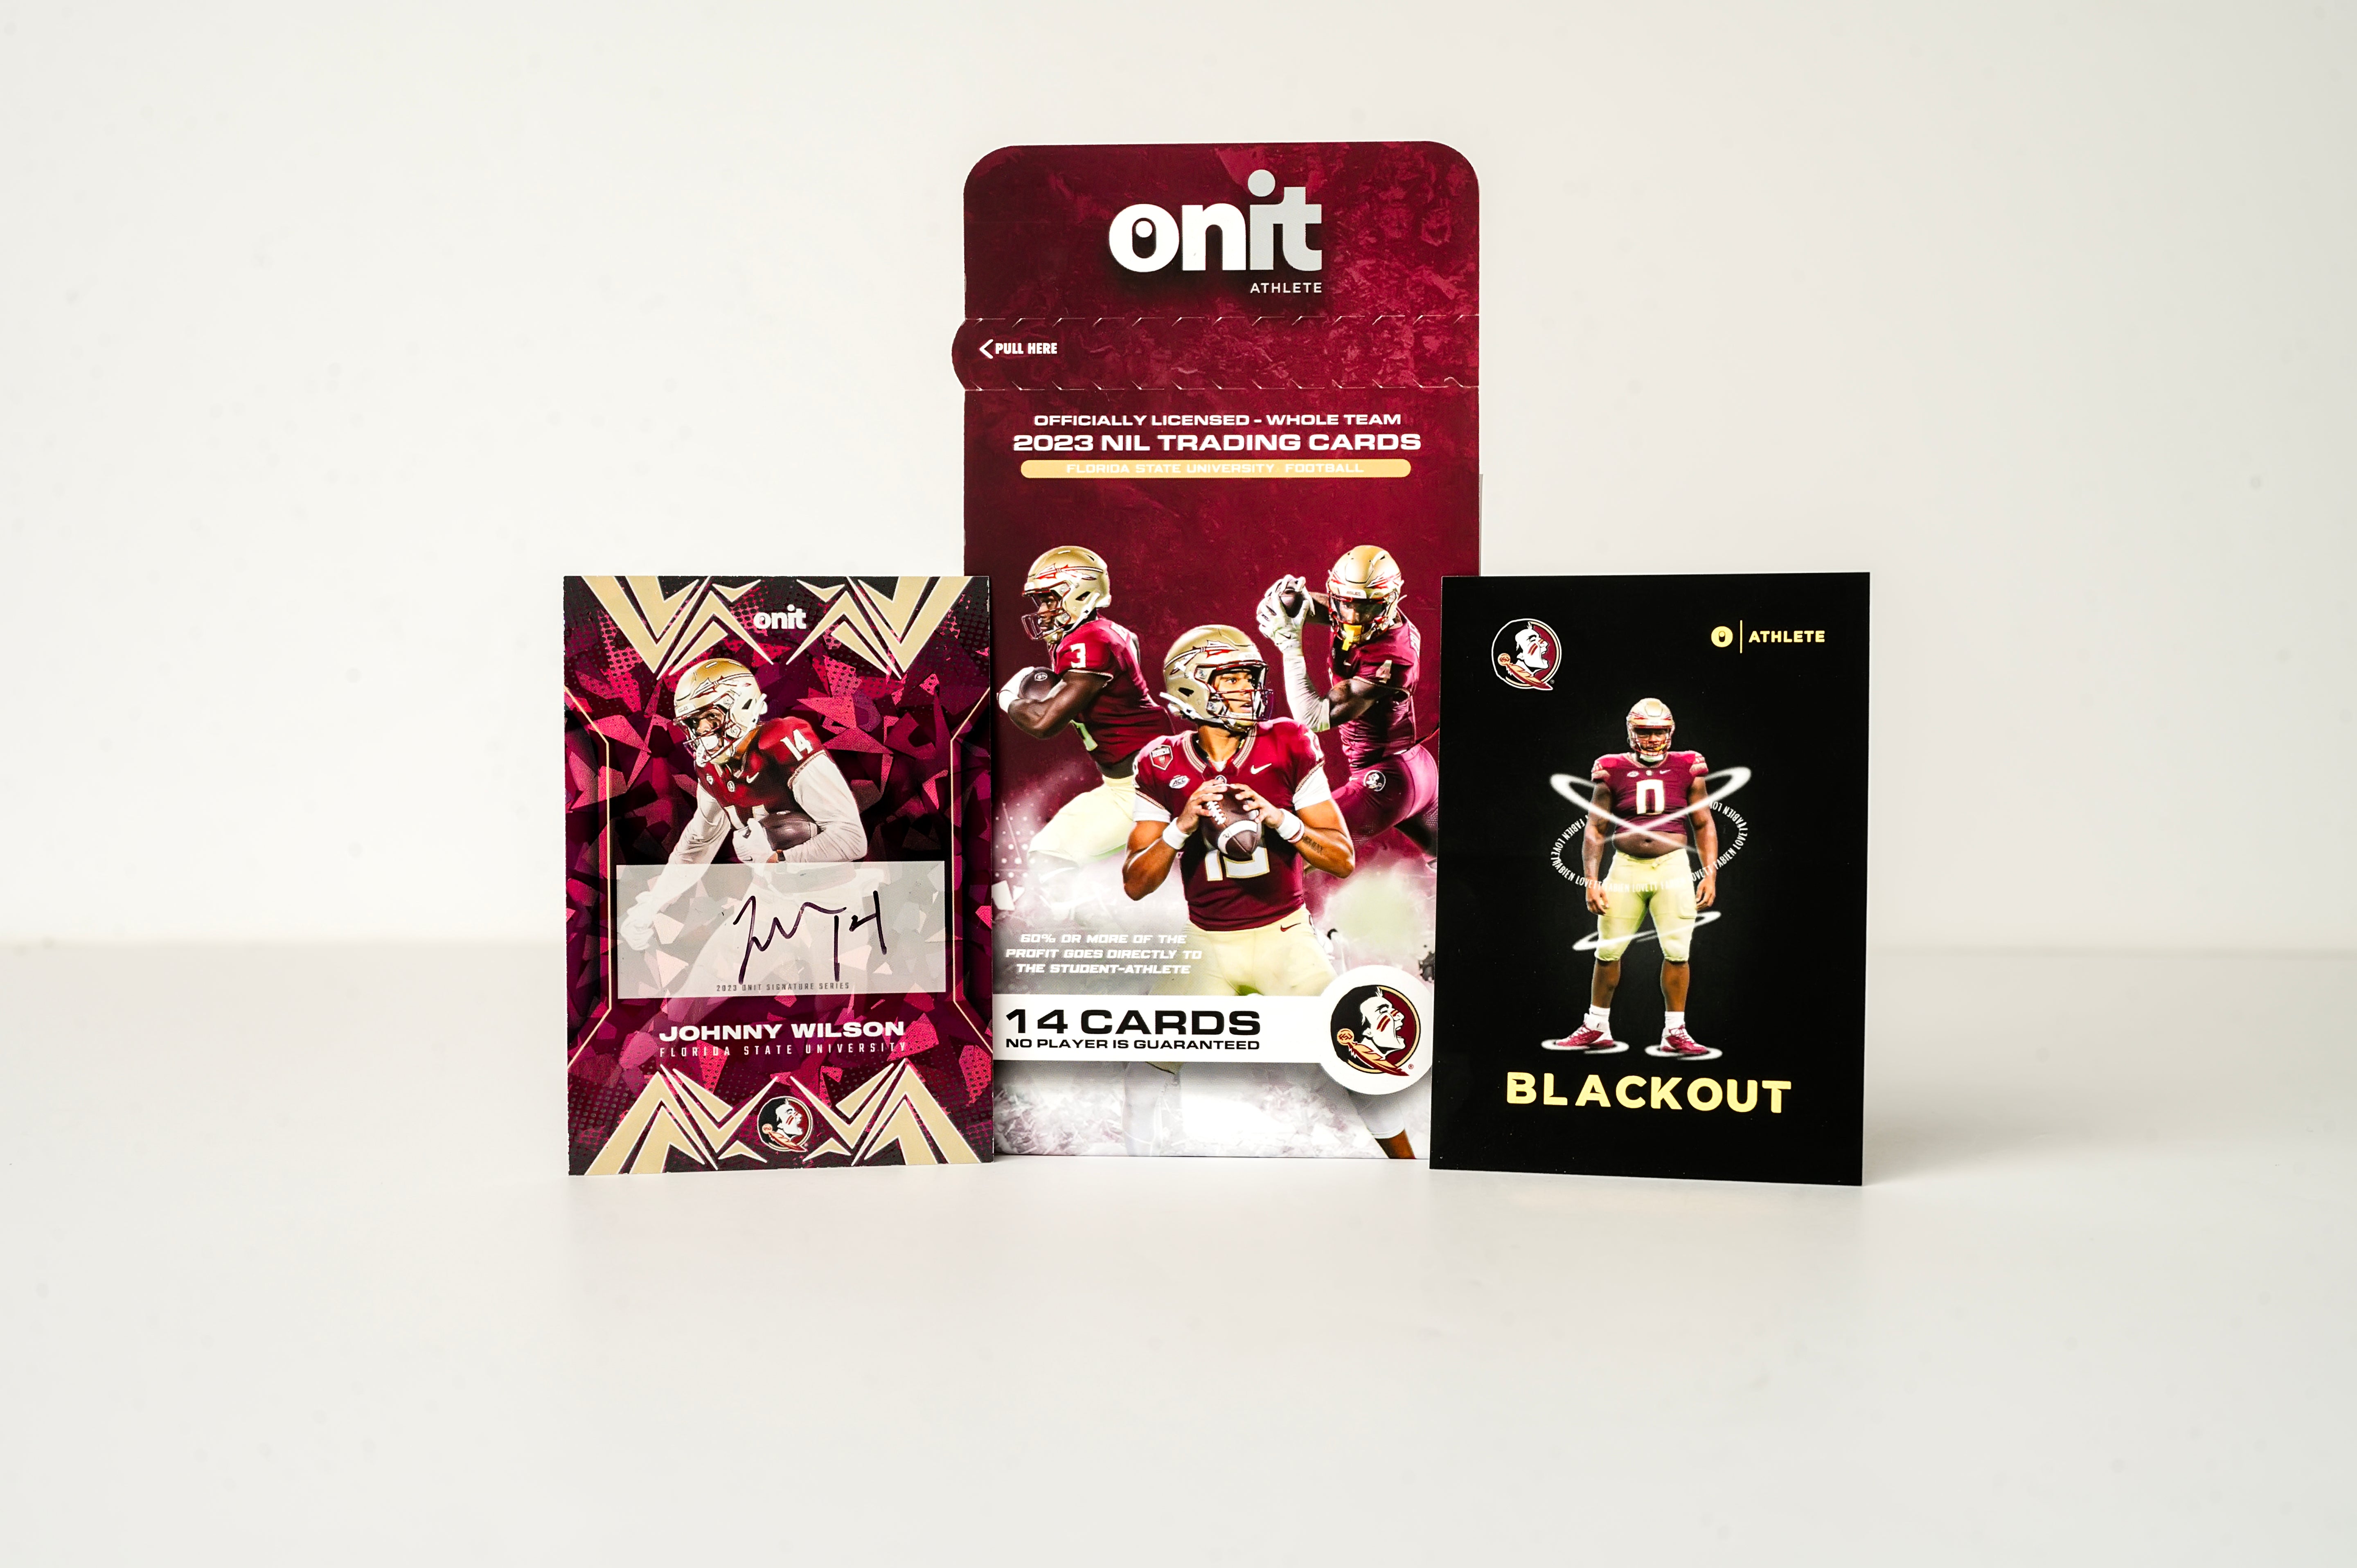 Trio Bundle - Florida State University Football - 3 Packs with a GUARANTEED AUTOGRAPH